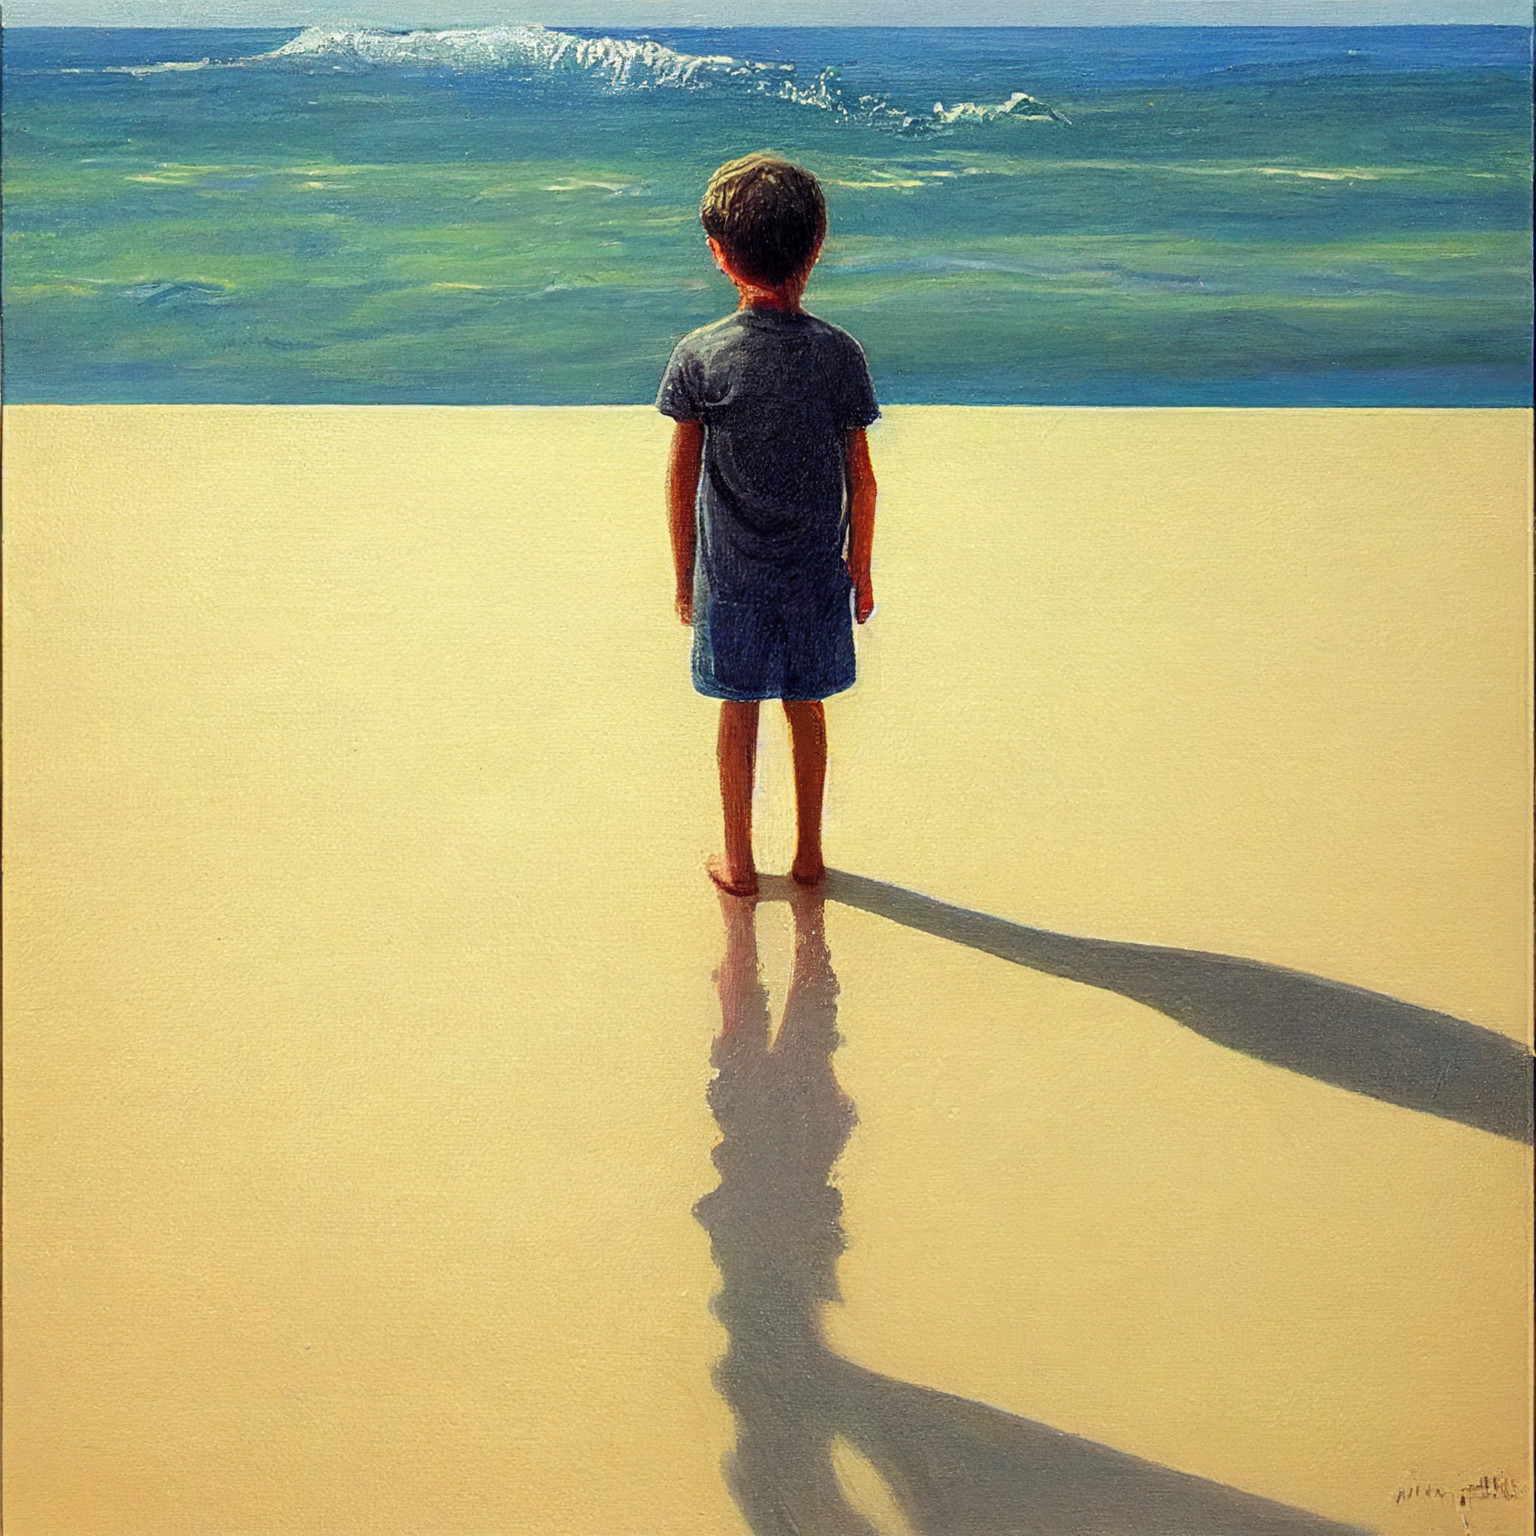 a painting of a child standing on an empty beach as imagined by Midjourney 